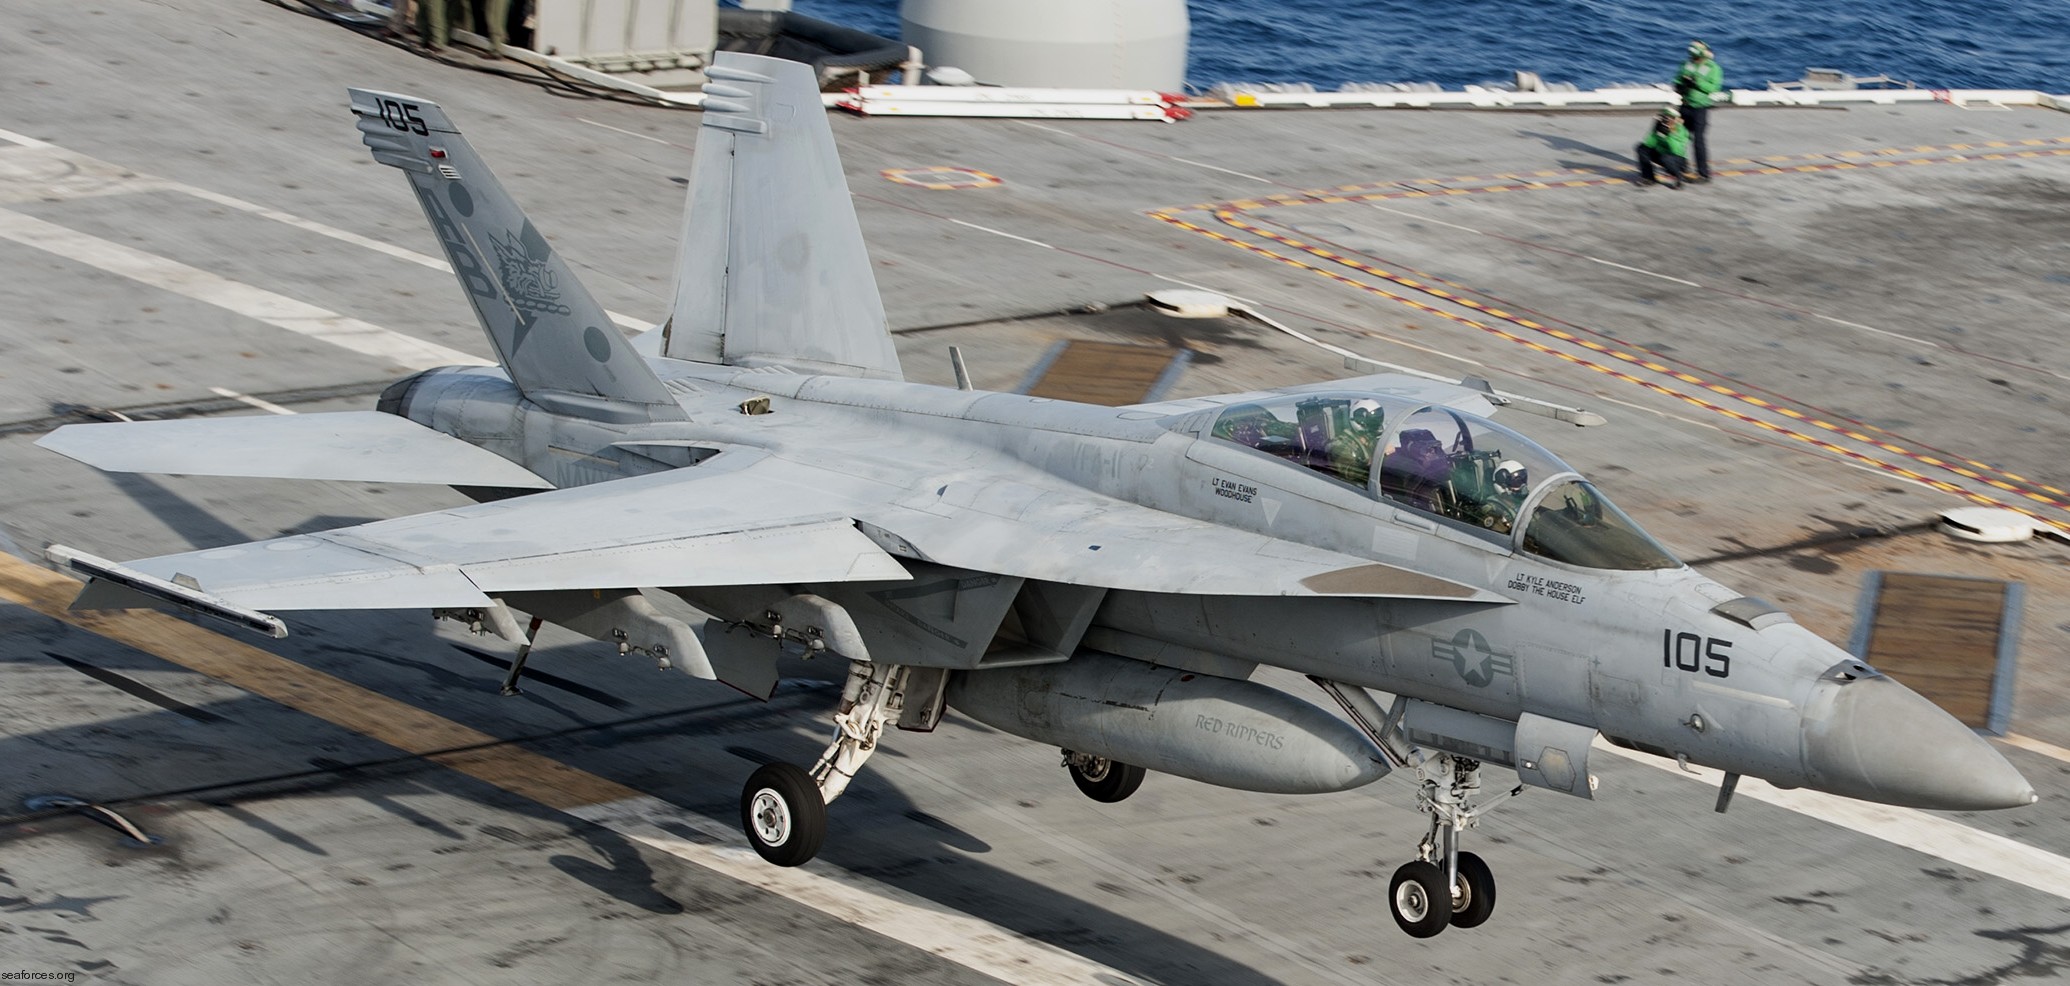 vfa-11 red rippers strike fighter squadron us navy f/a-18f super hornet carrier air wing cvw-1 uss harry s. truman cvn-75 25